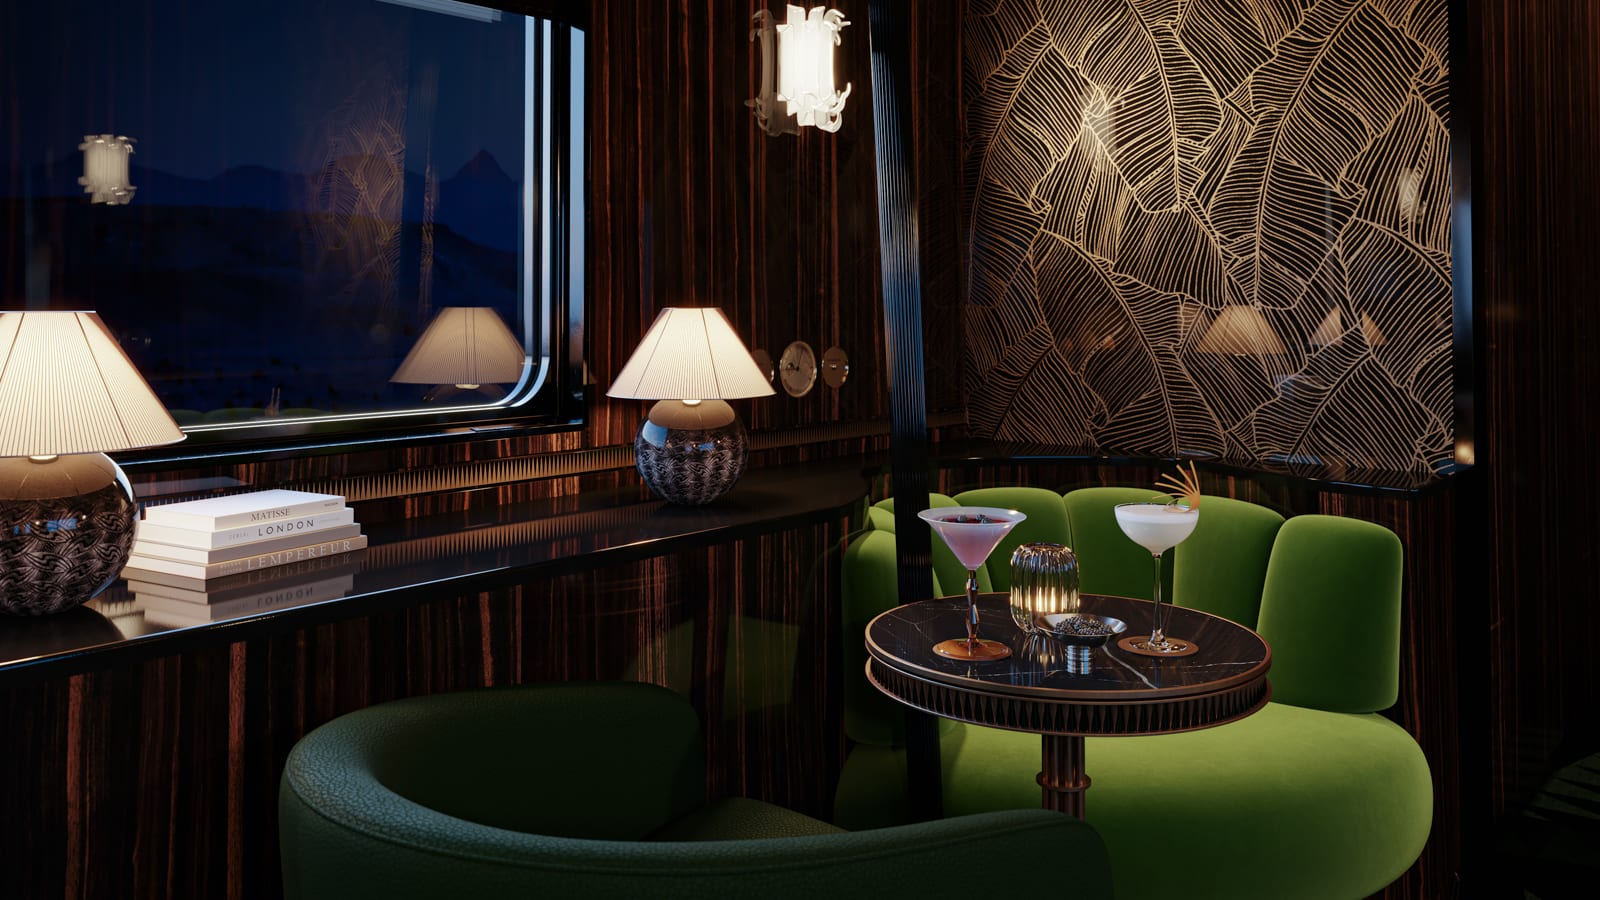 Interiors of the revamped Orient Express revealed